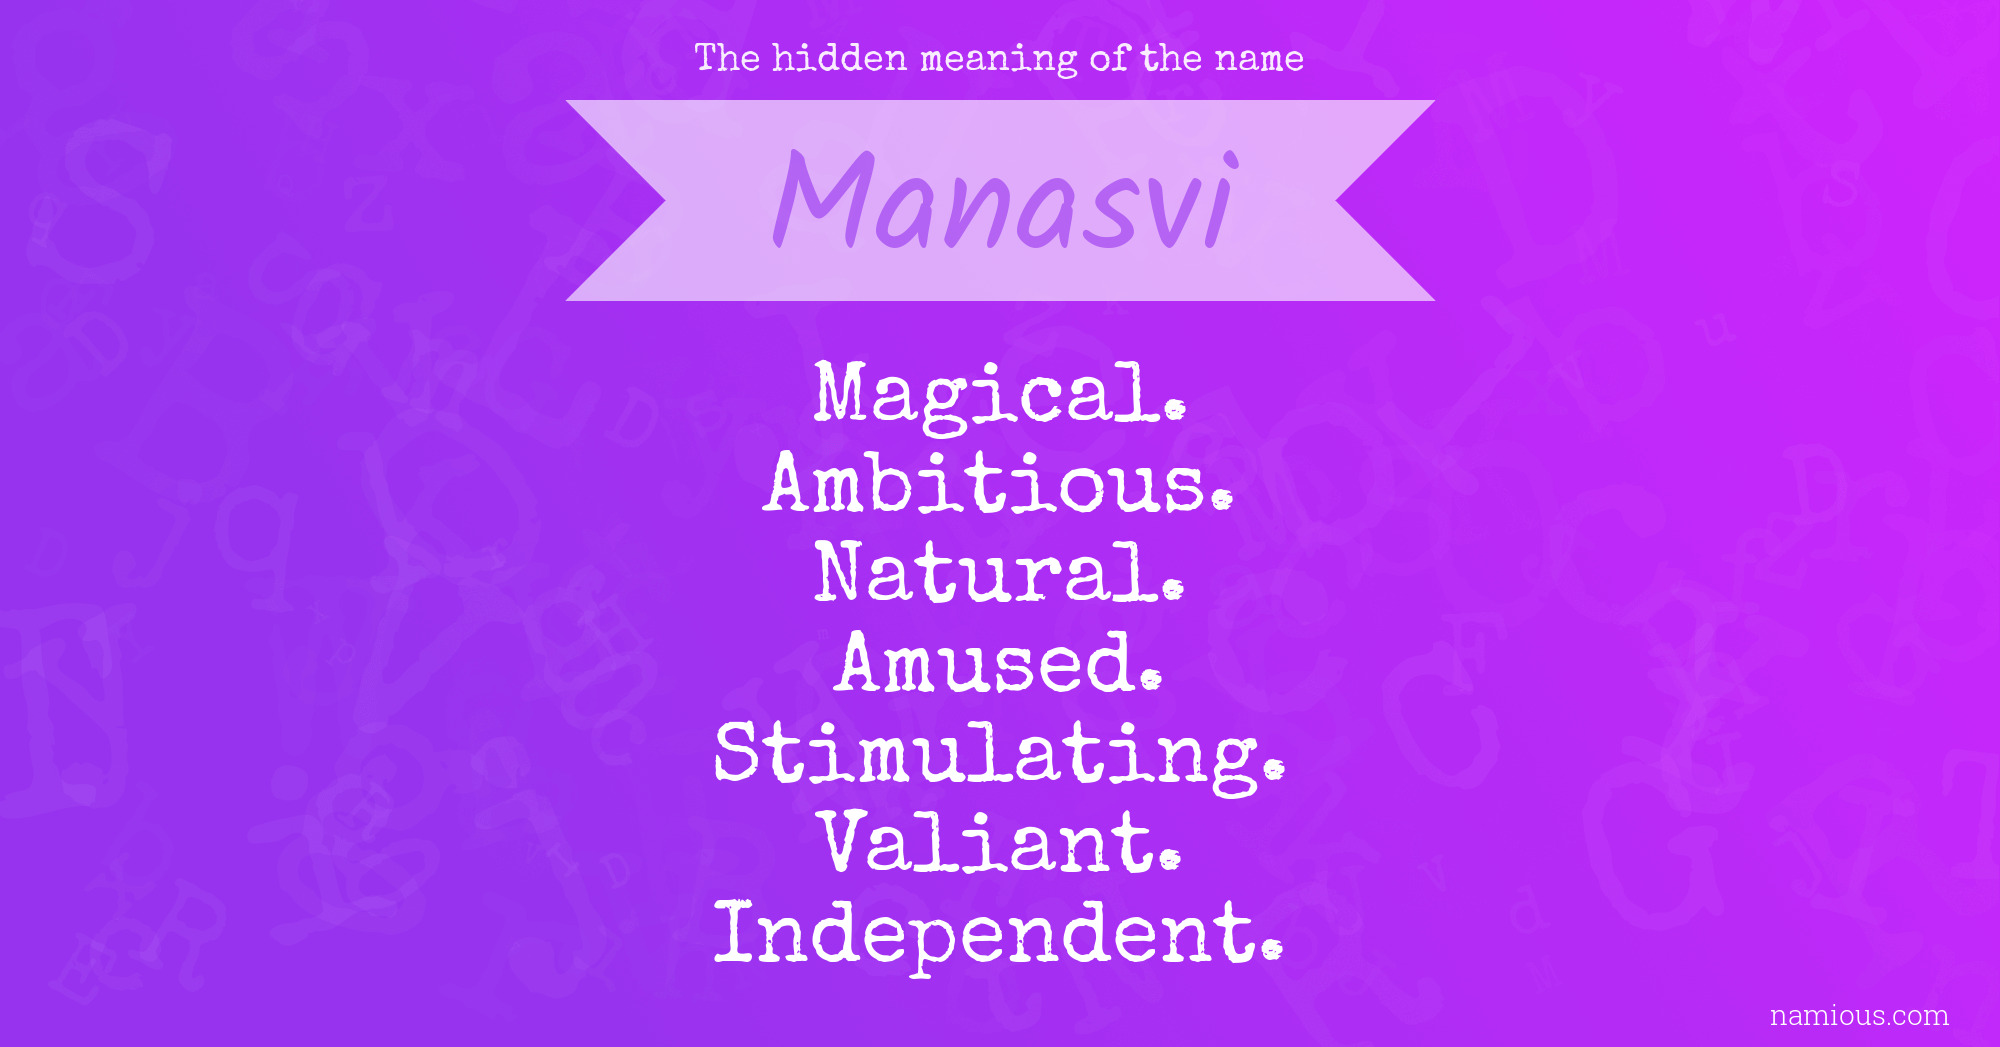 The hidden meaning of the name Manasvi